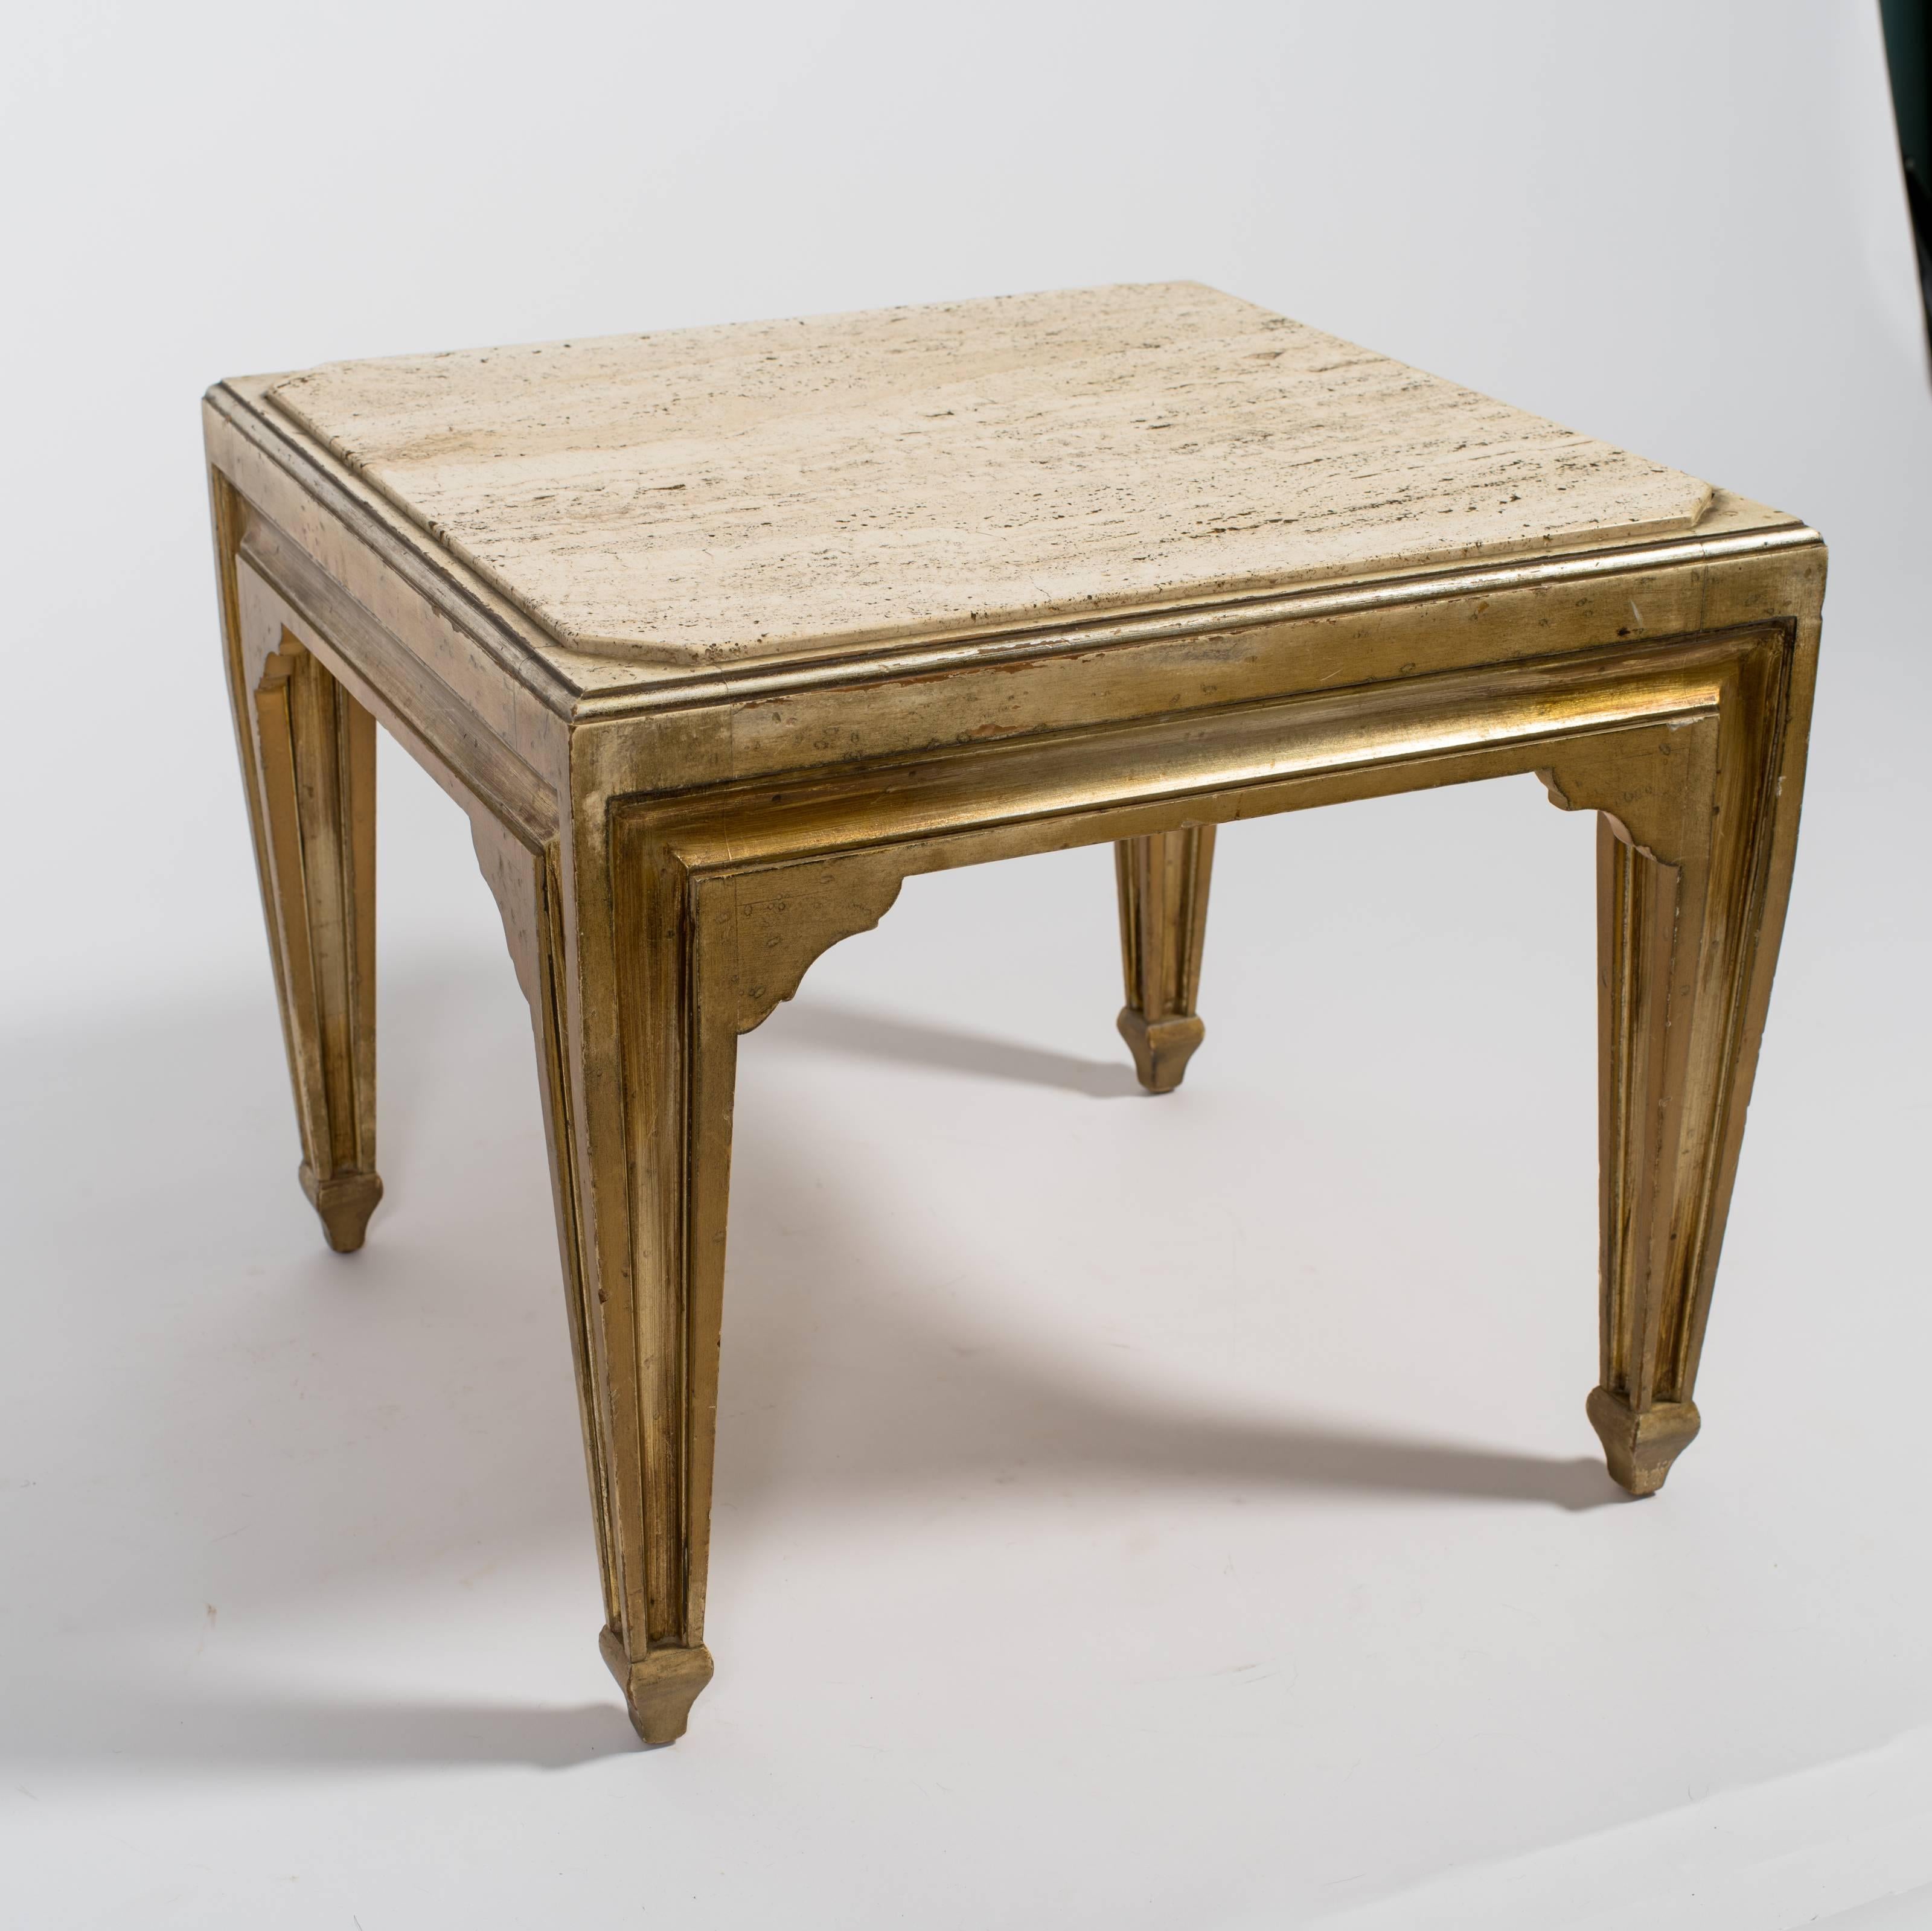 Italian silvered wood and travertine side tables.